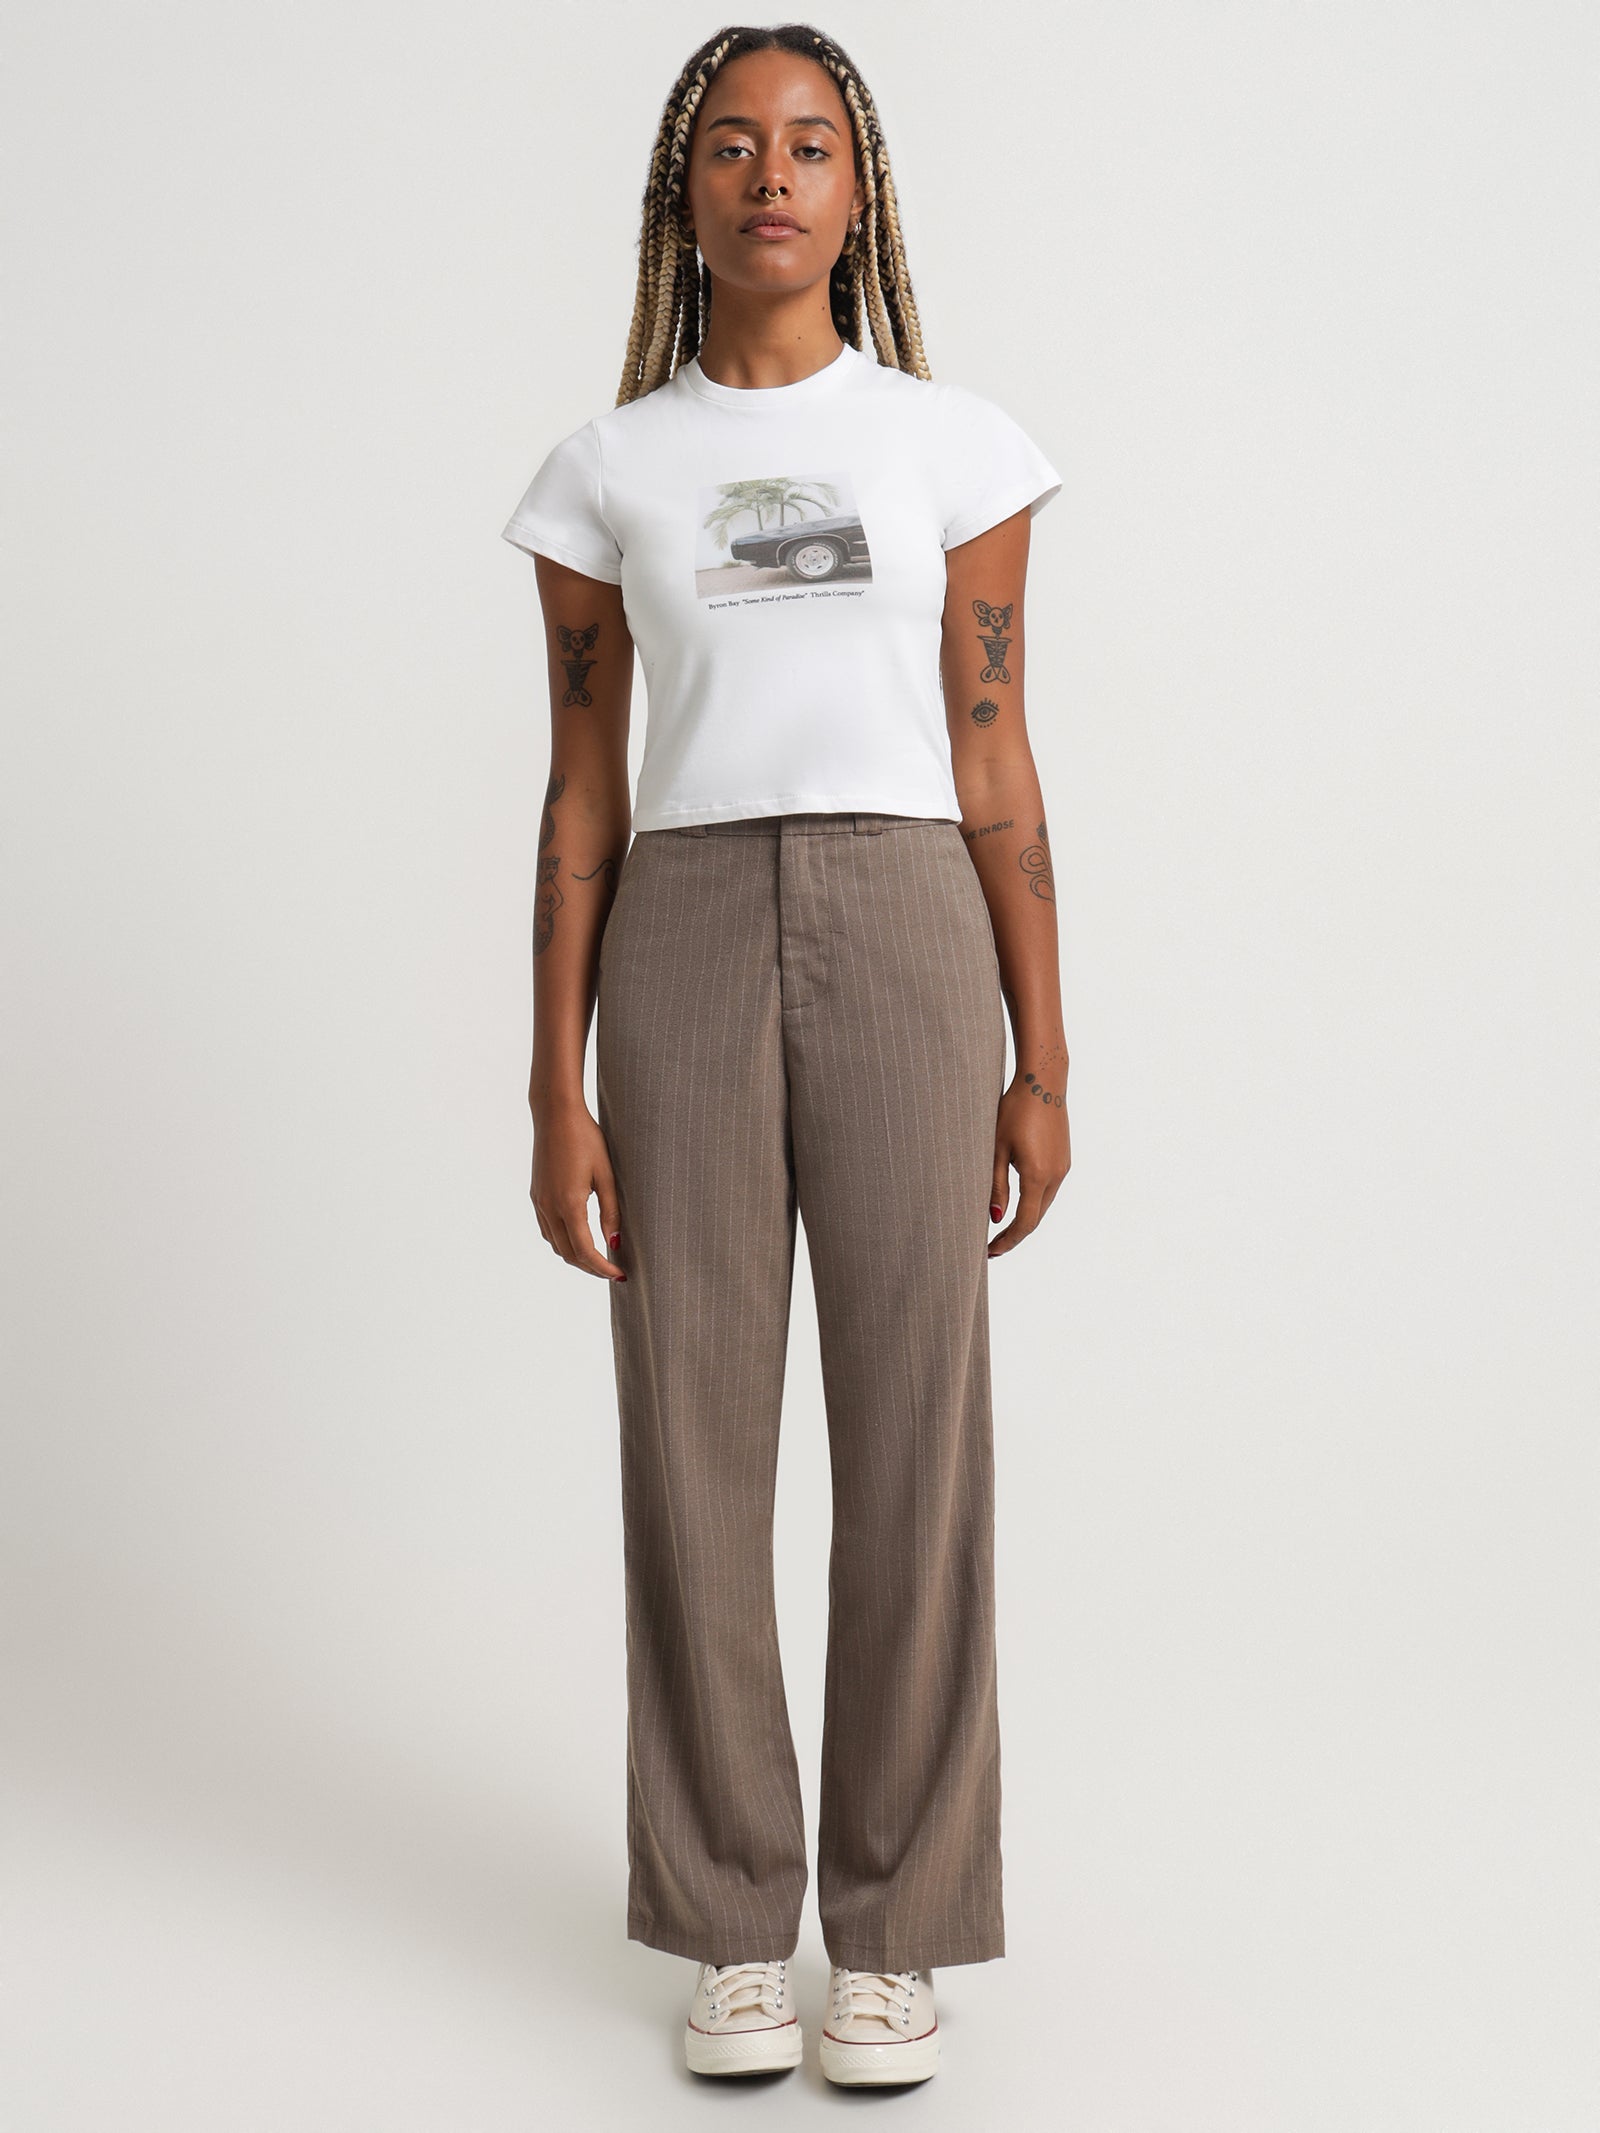 Danny Pinstripe Pants in Taupe - Glue Store